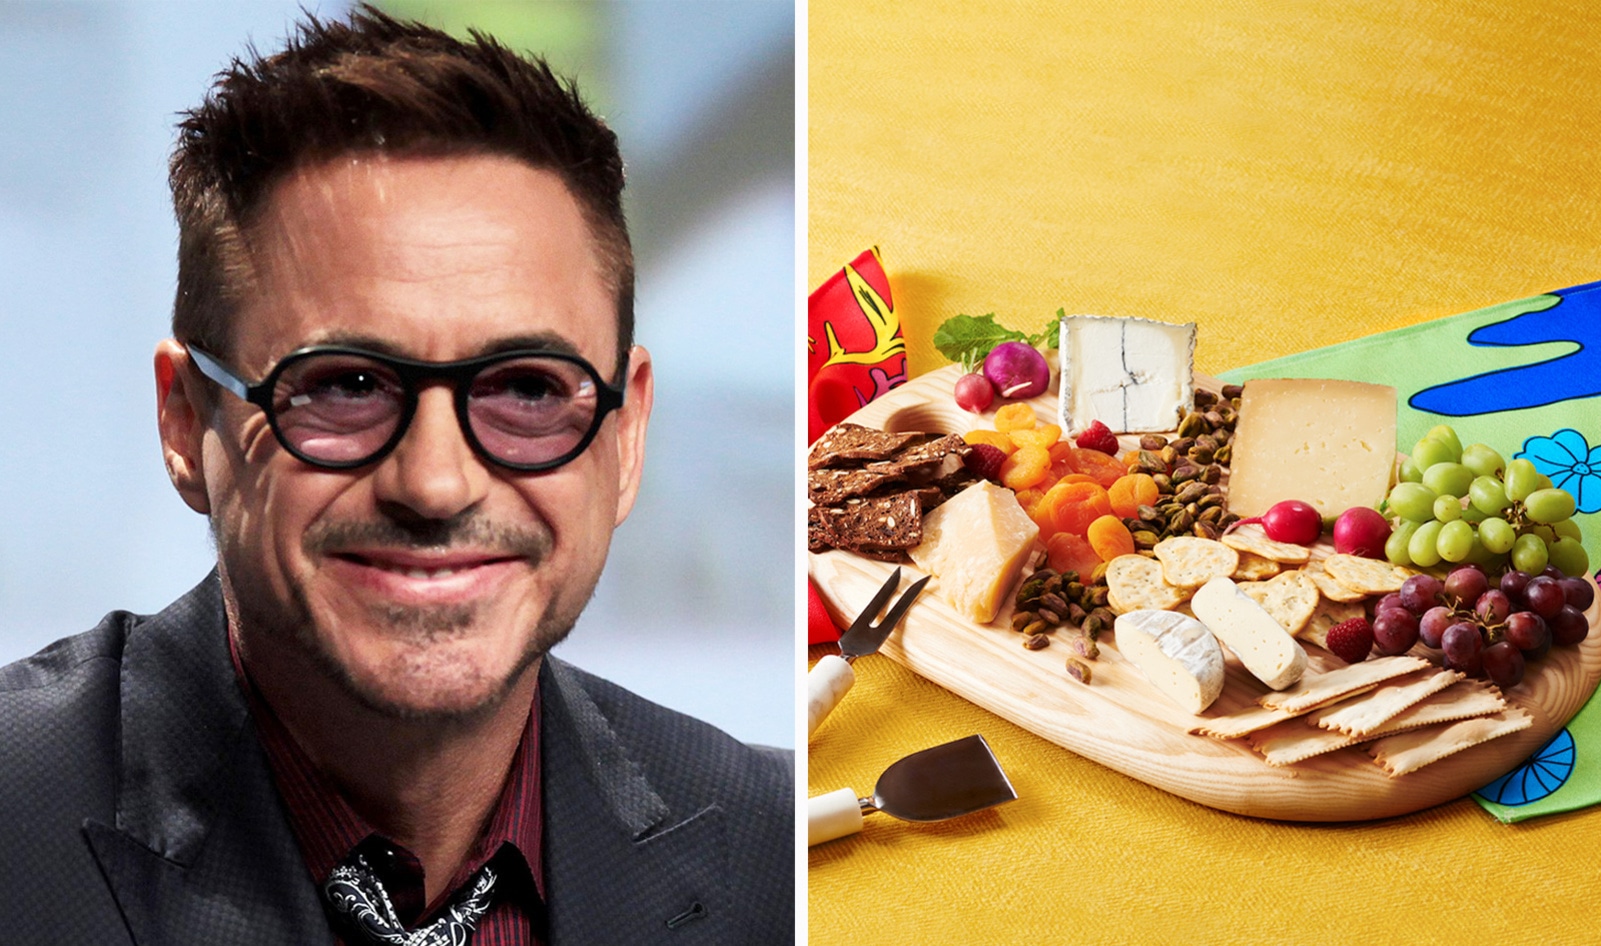 Robert Downey Jr. Says This Vegan Cheese Startup Puts the “Eco In Queso"